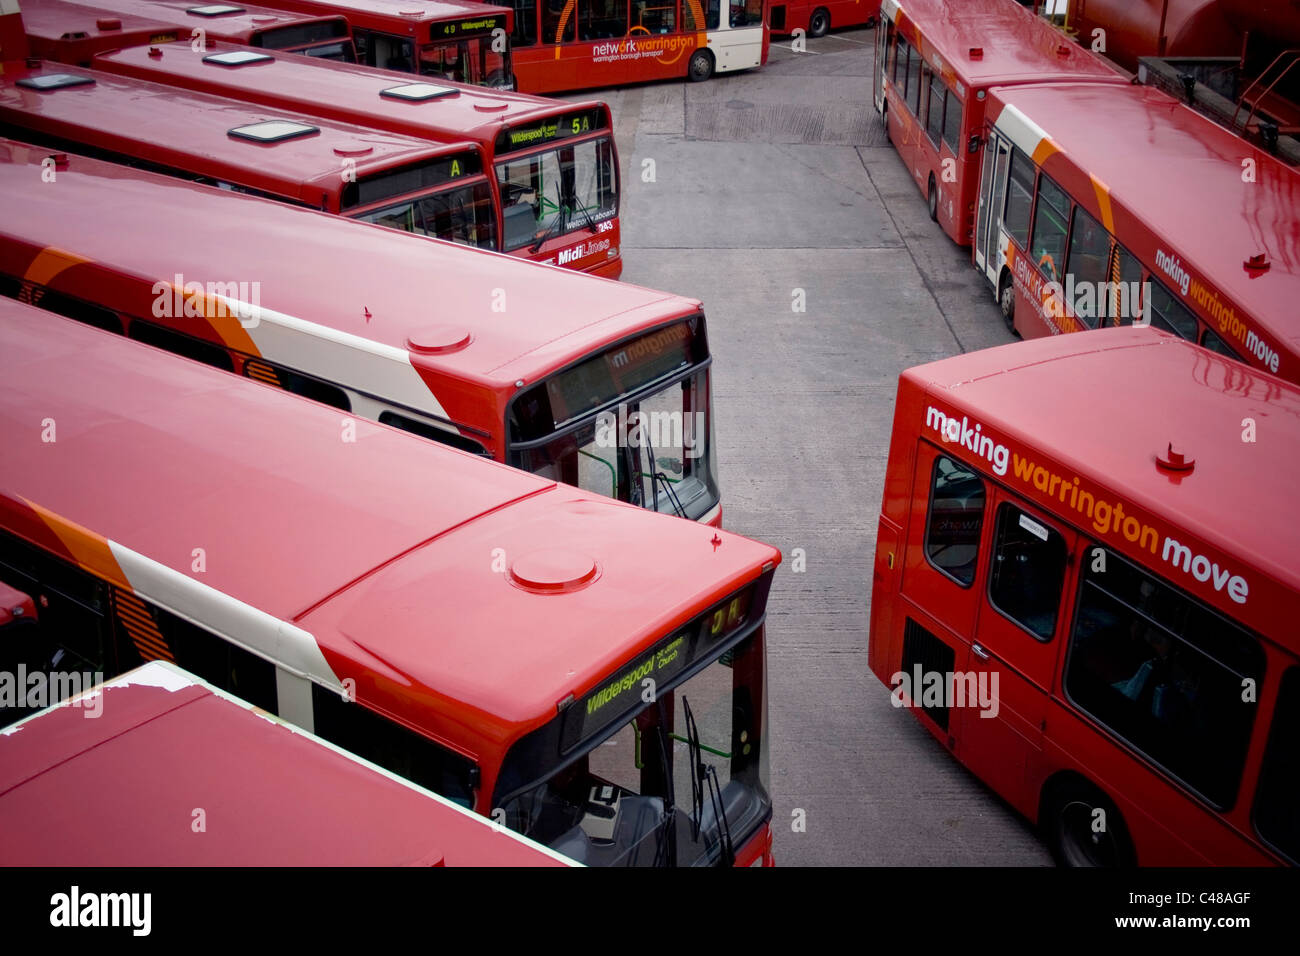 A number of Warrington buses sit parked in a depot during a public holiday. Stock Photo